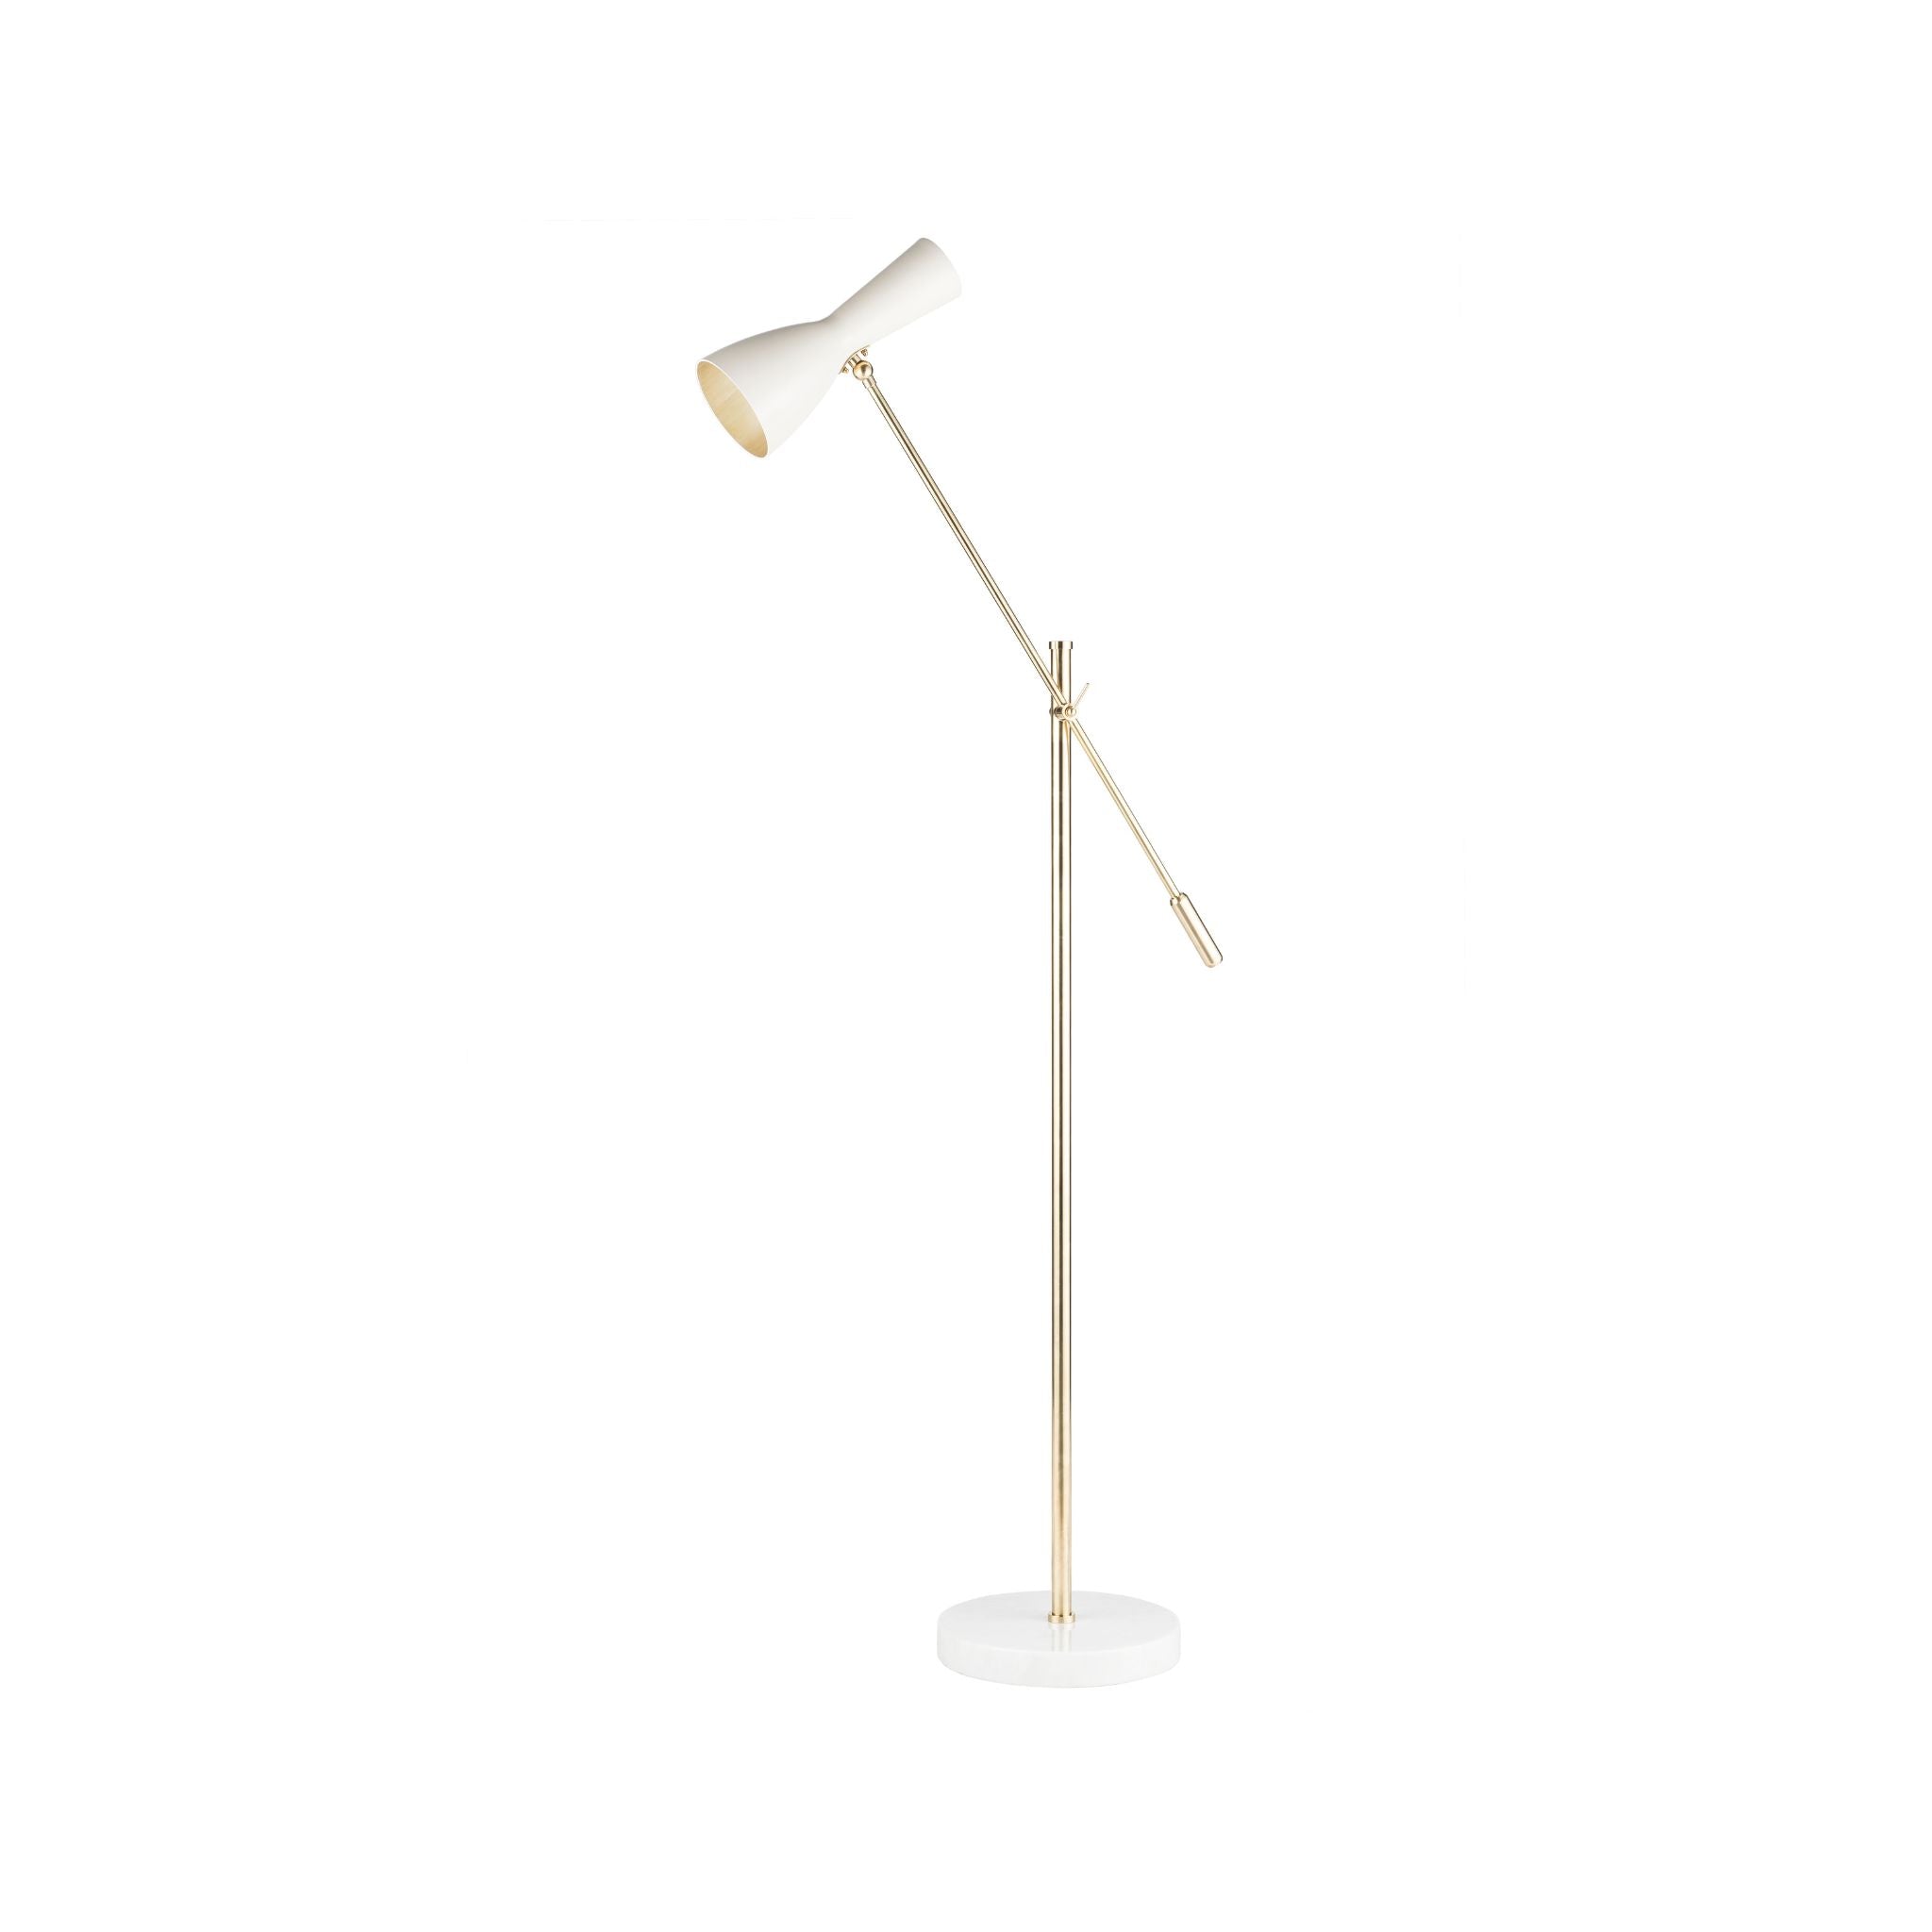 Wormhole cream brass one joint arm stand floor lamp - ilbronzetto